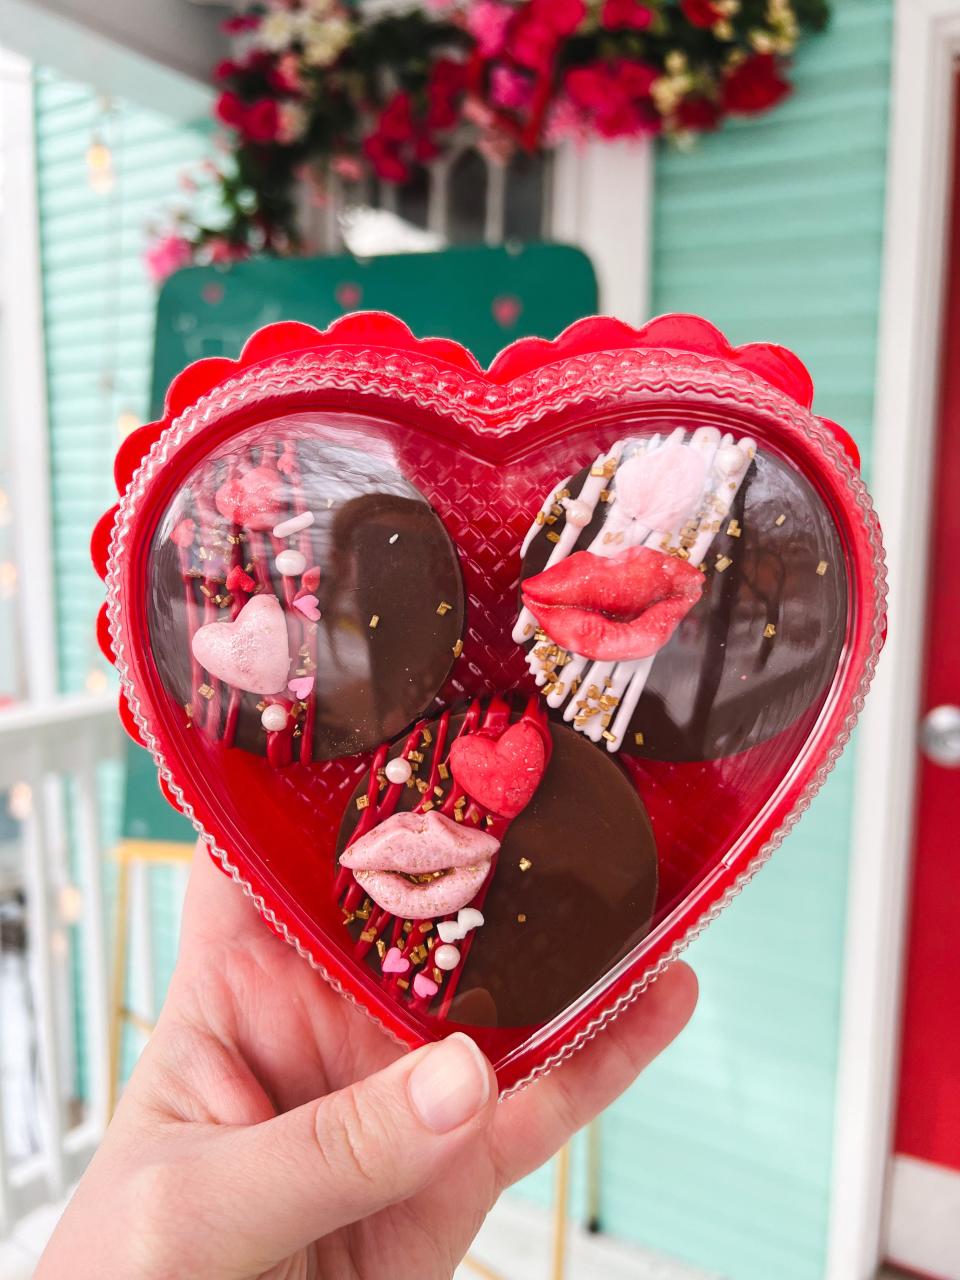 One of many themed specialty treats available at Katie Bug’s for Valentine’s Day.